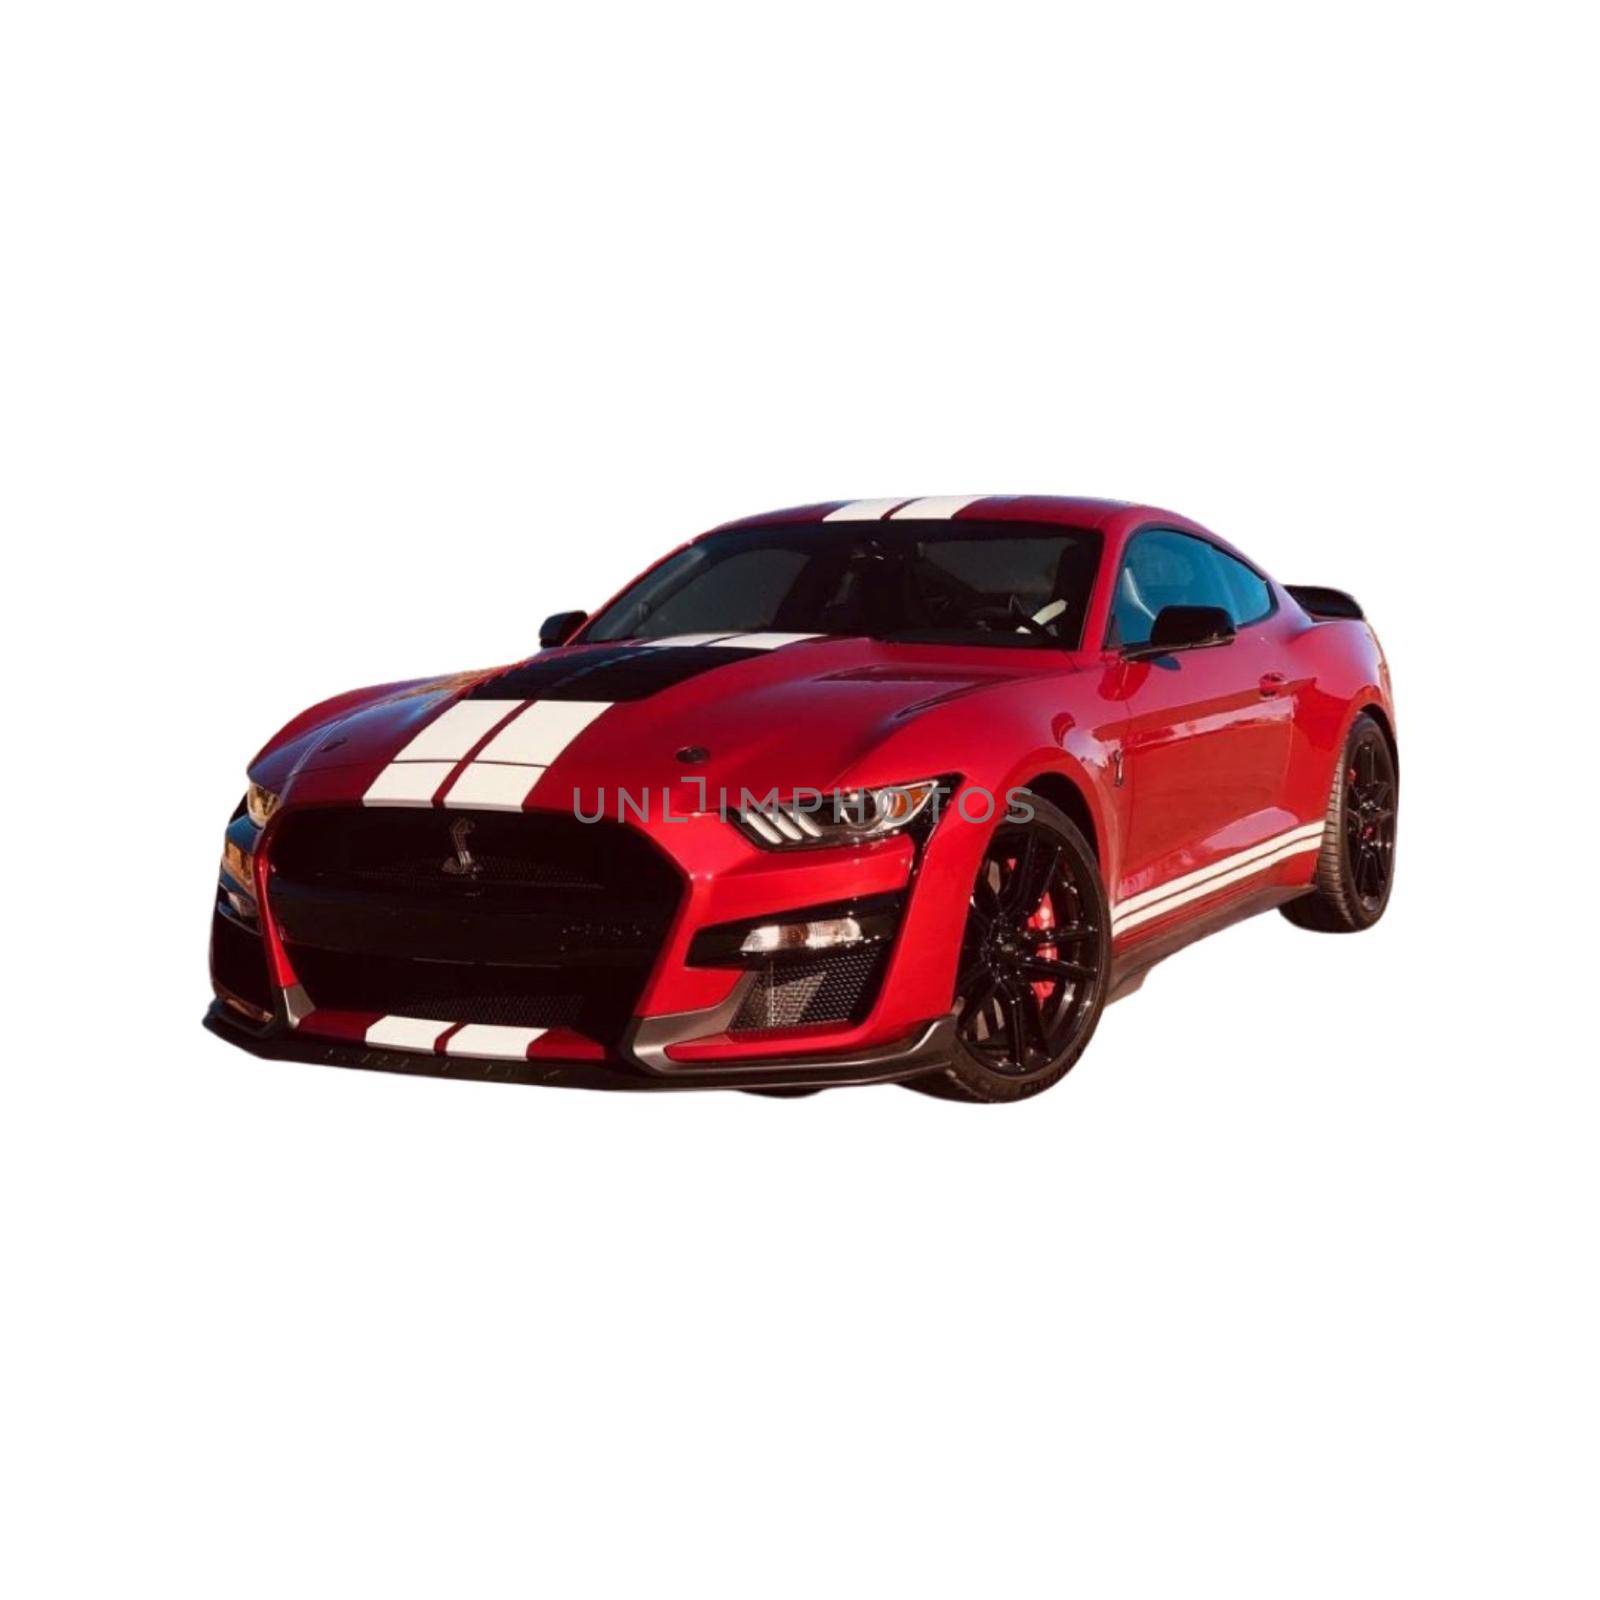 Picture of a Mustang GT500 Shelby by FlyingDoctor